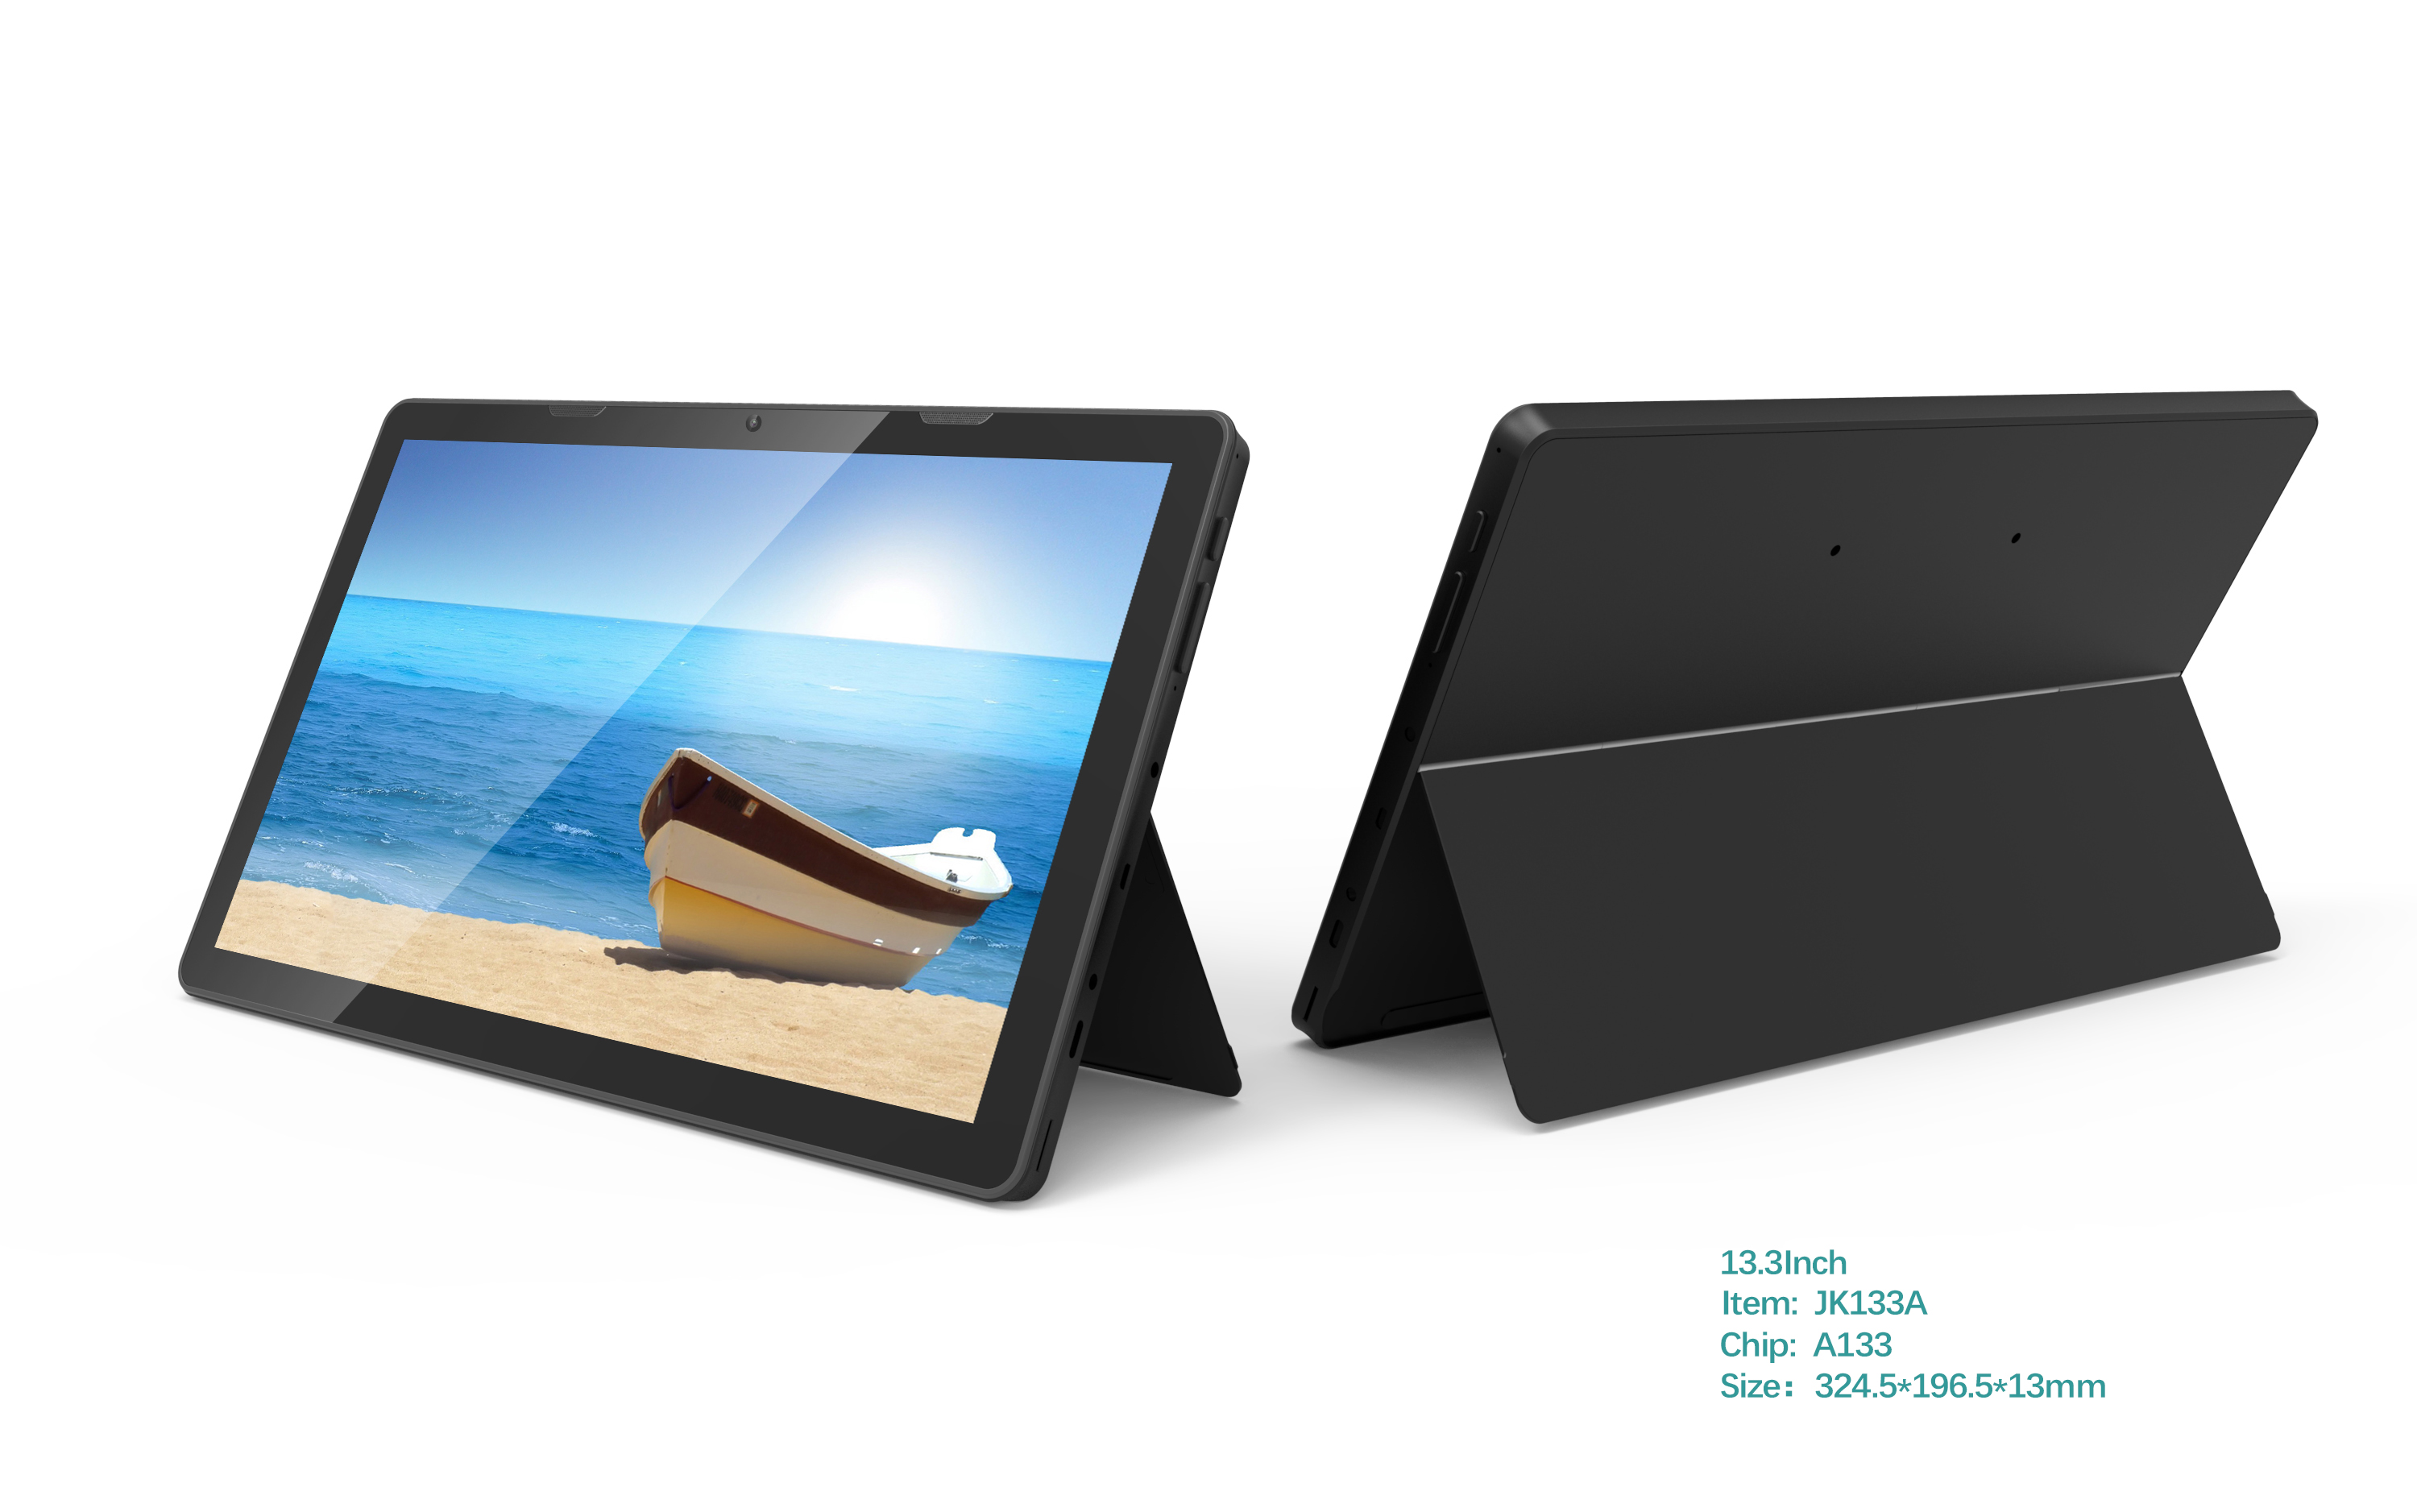 13.3inch Tablet pc with adjustable stand